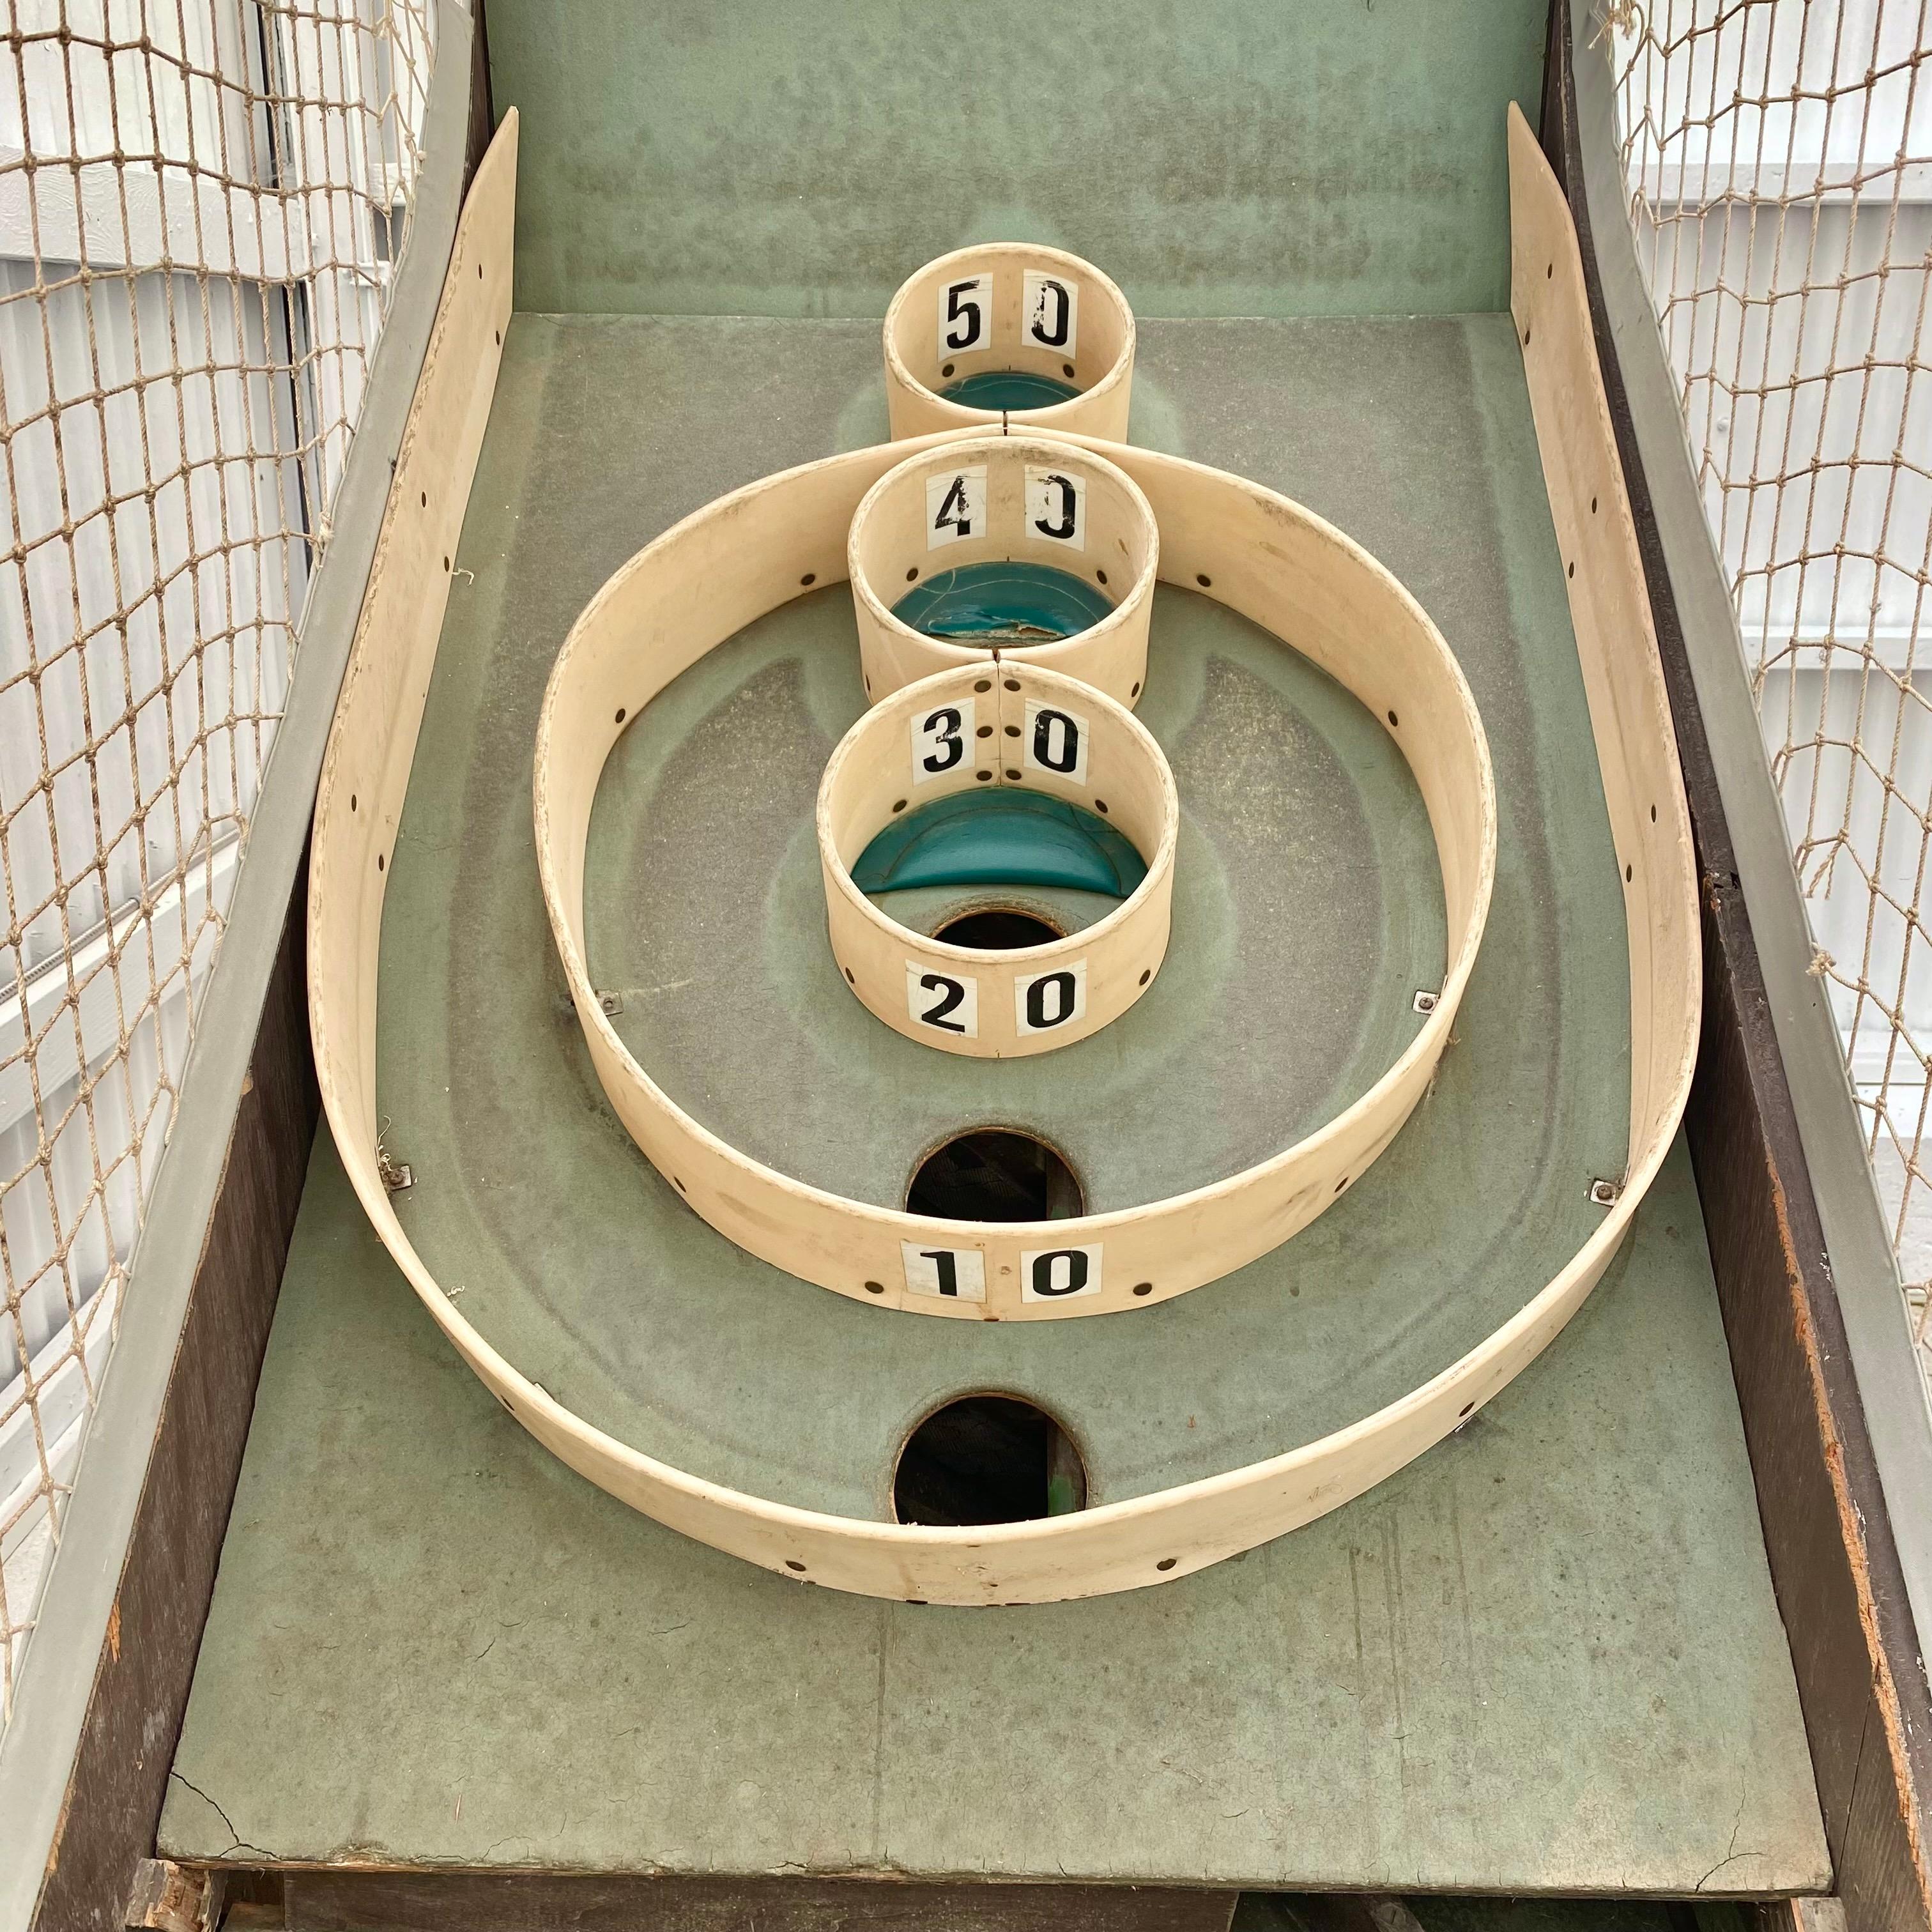 skee ball machine for sale used